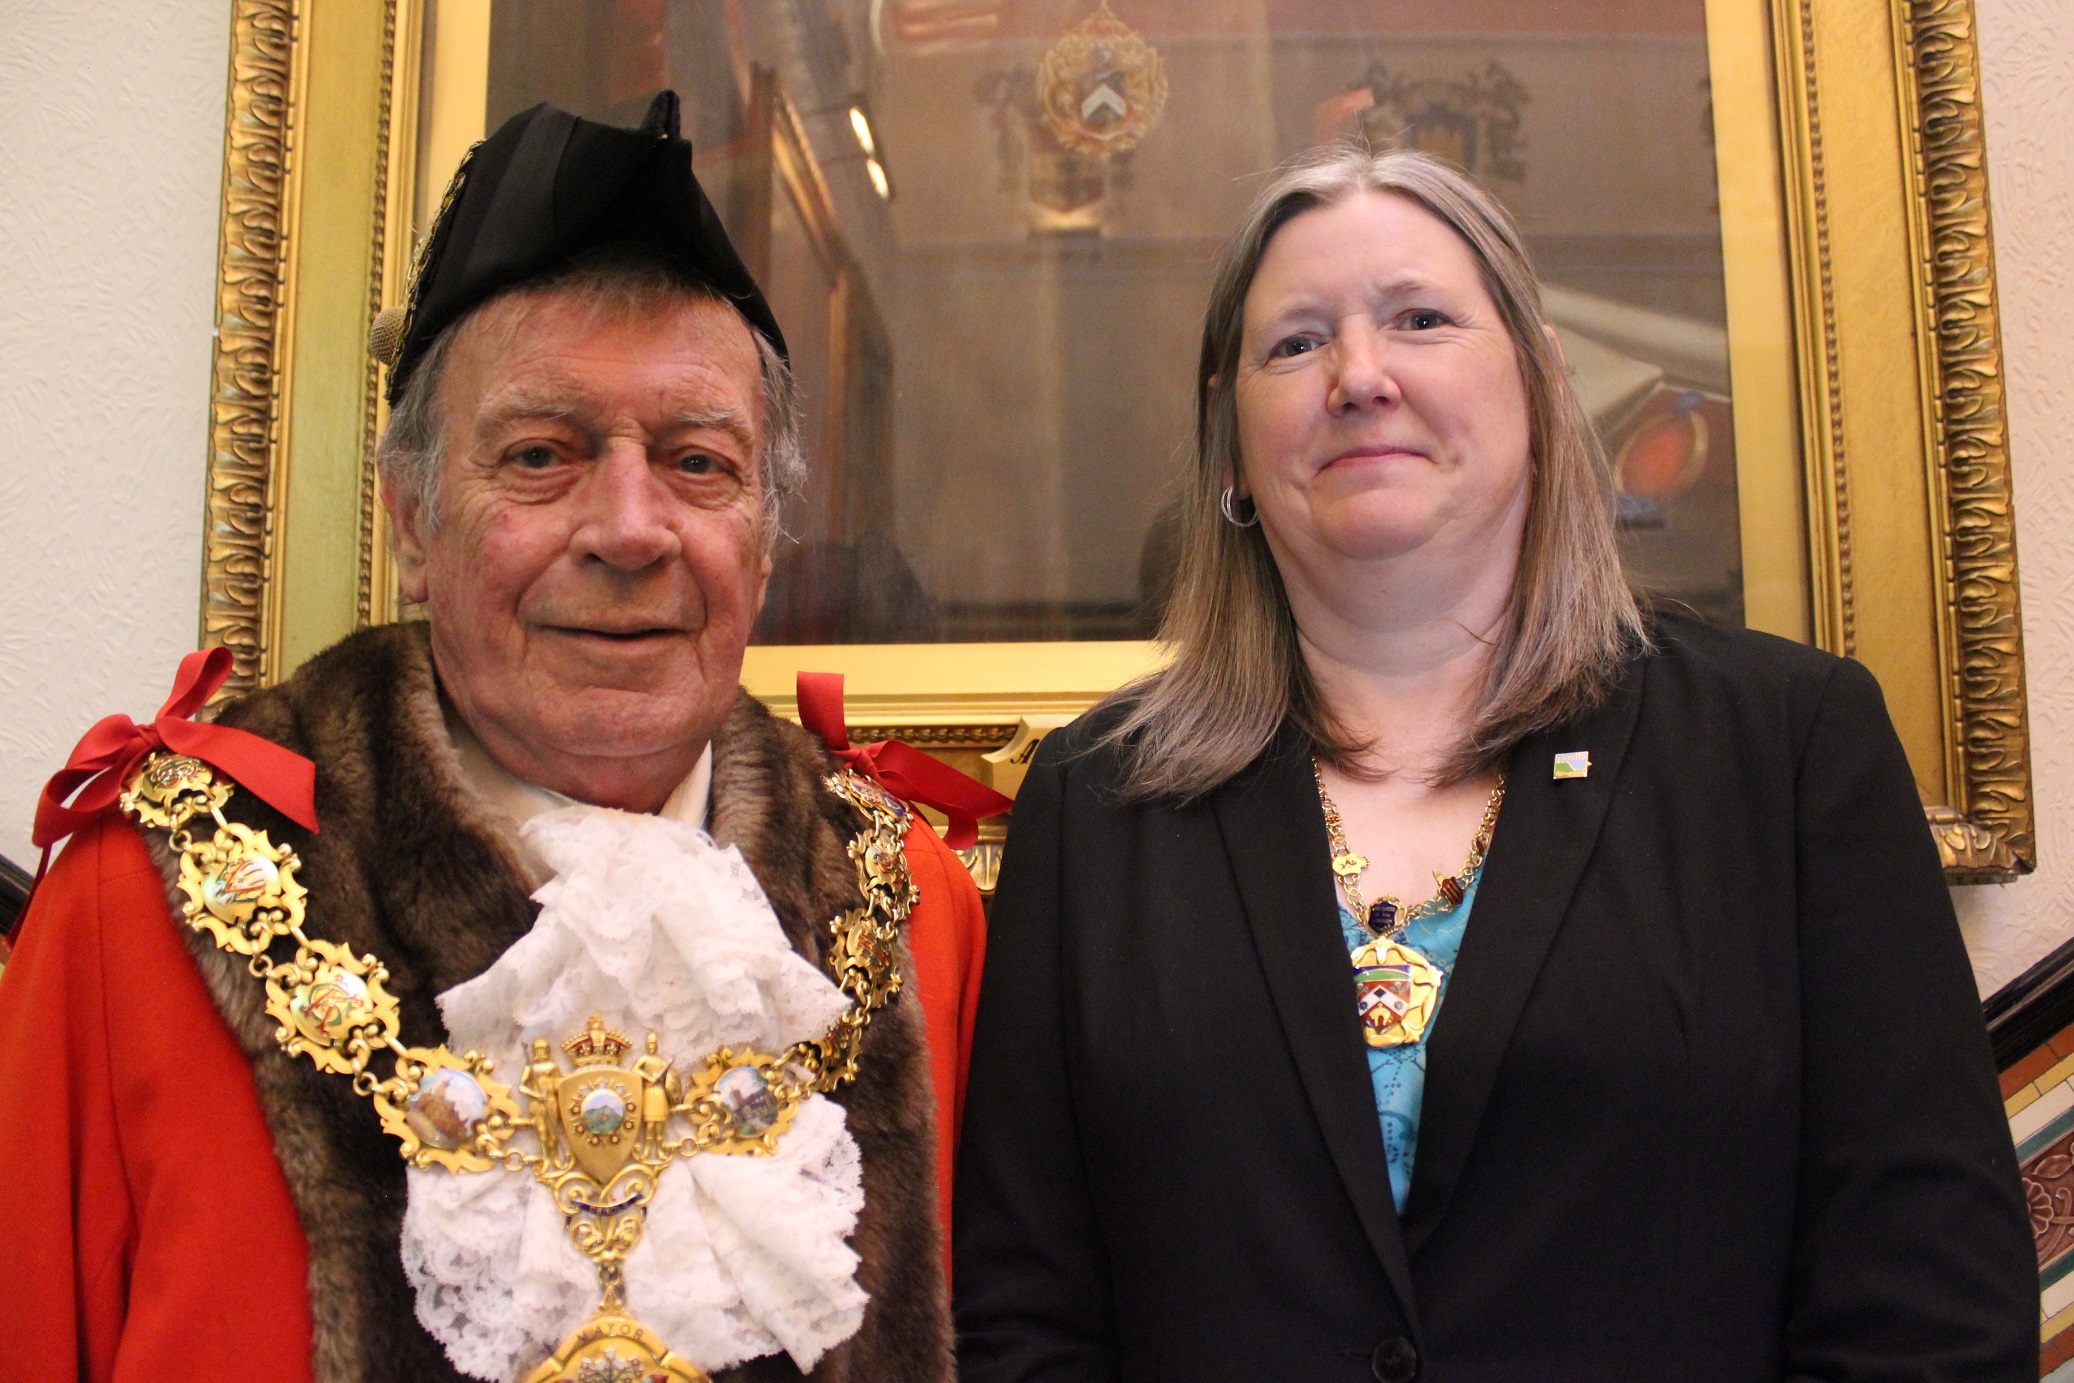 Photo showing Pendle's new Mayor and Mayoress, Cllr Ken Hartley and Cllr Jayne Mills